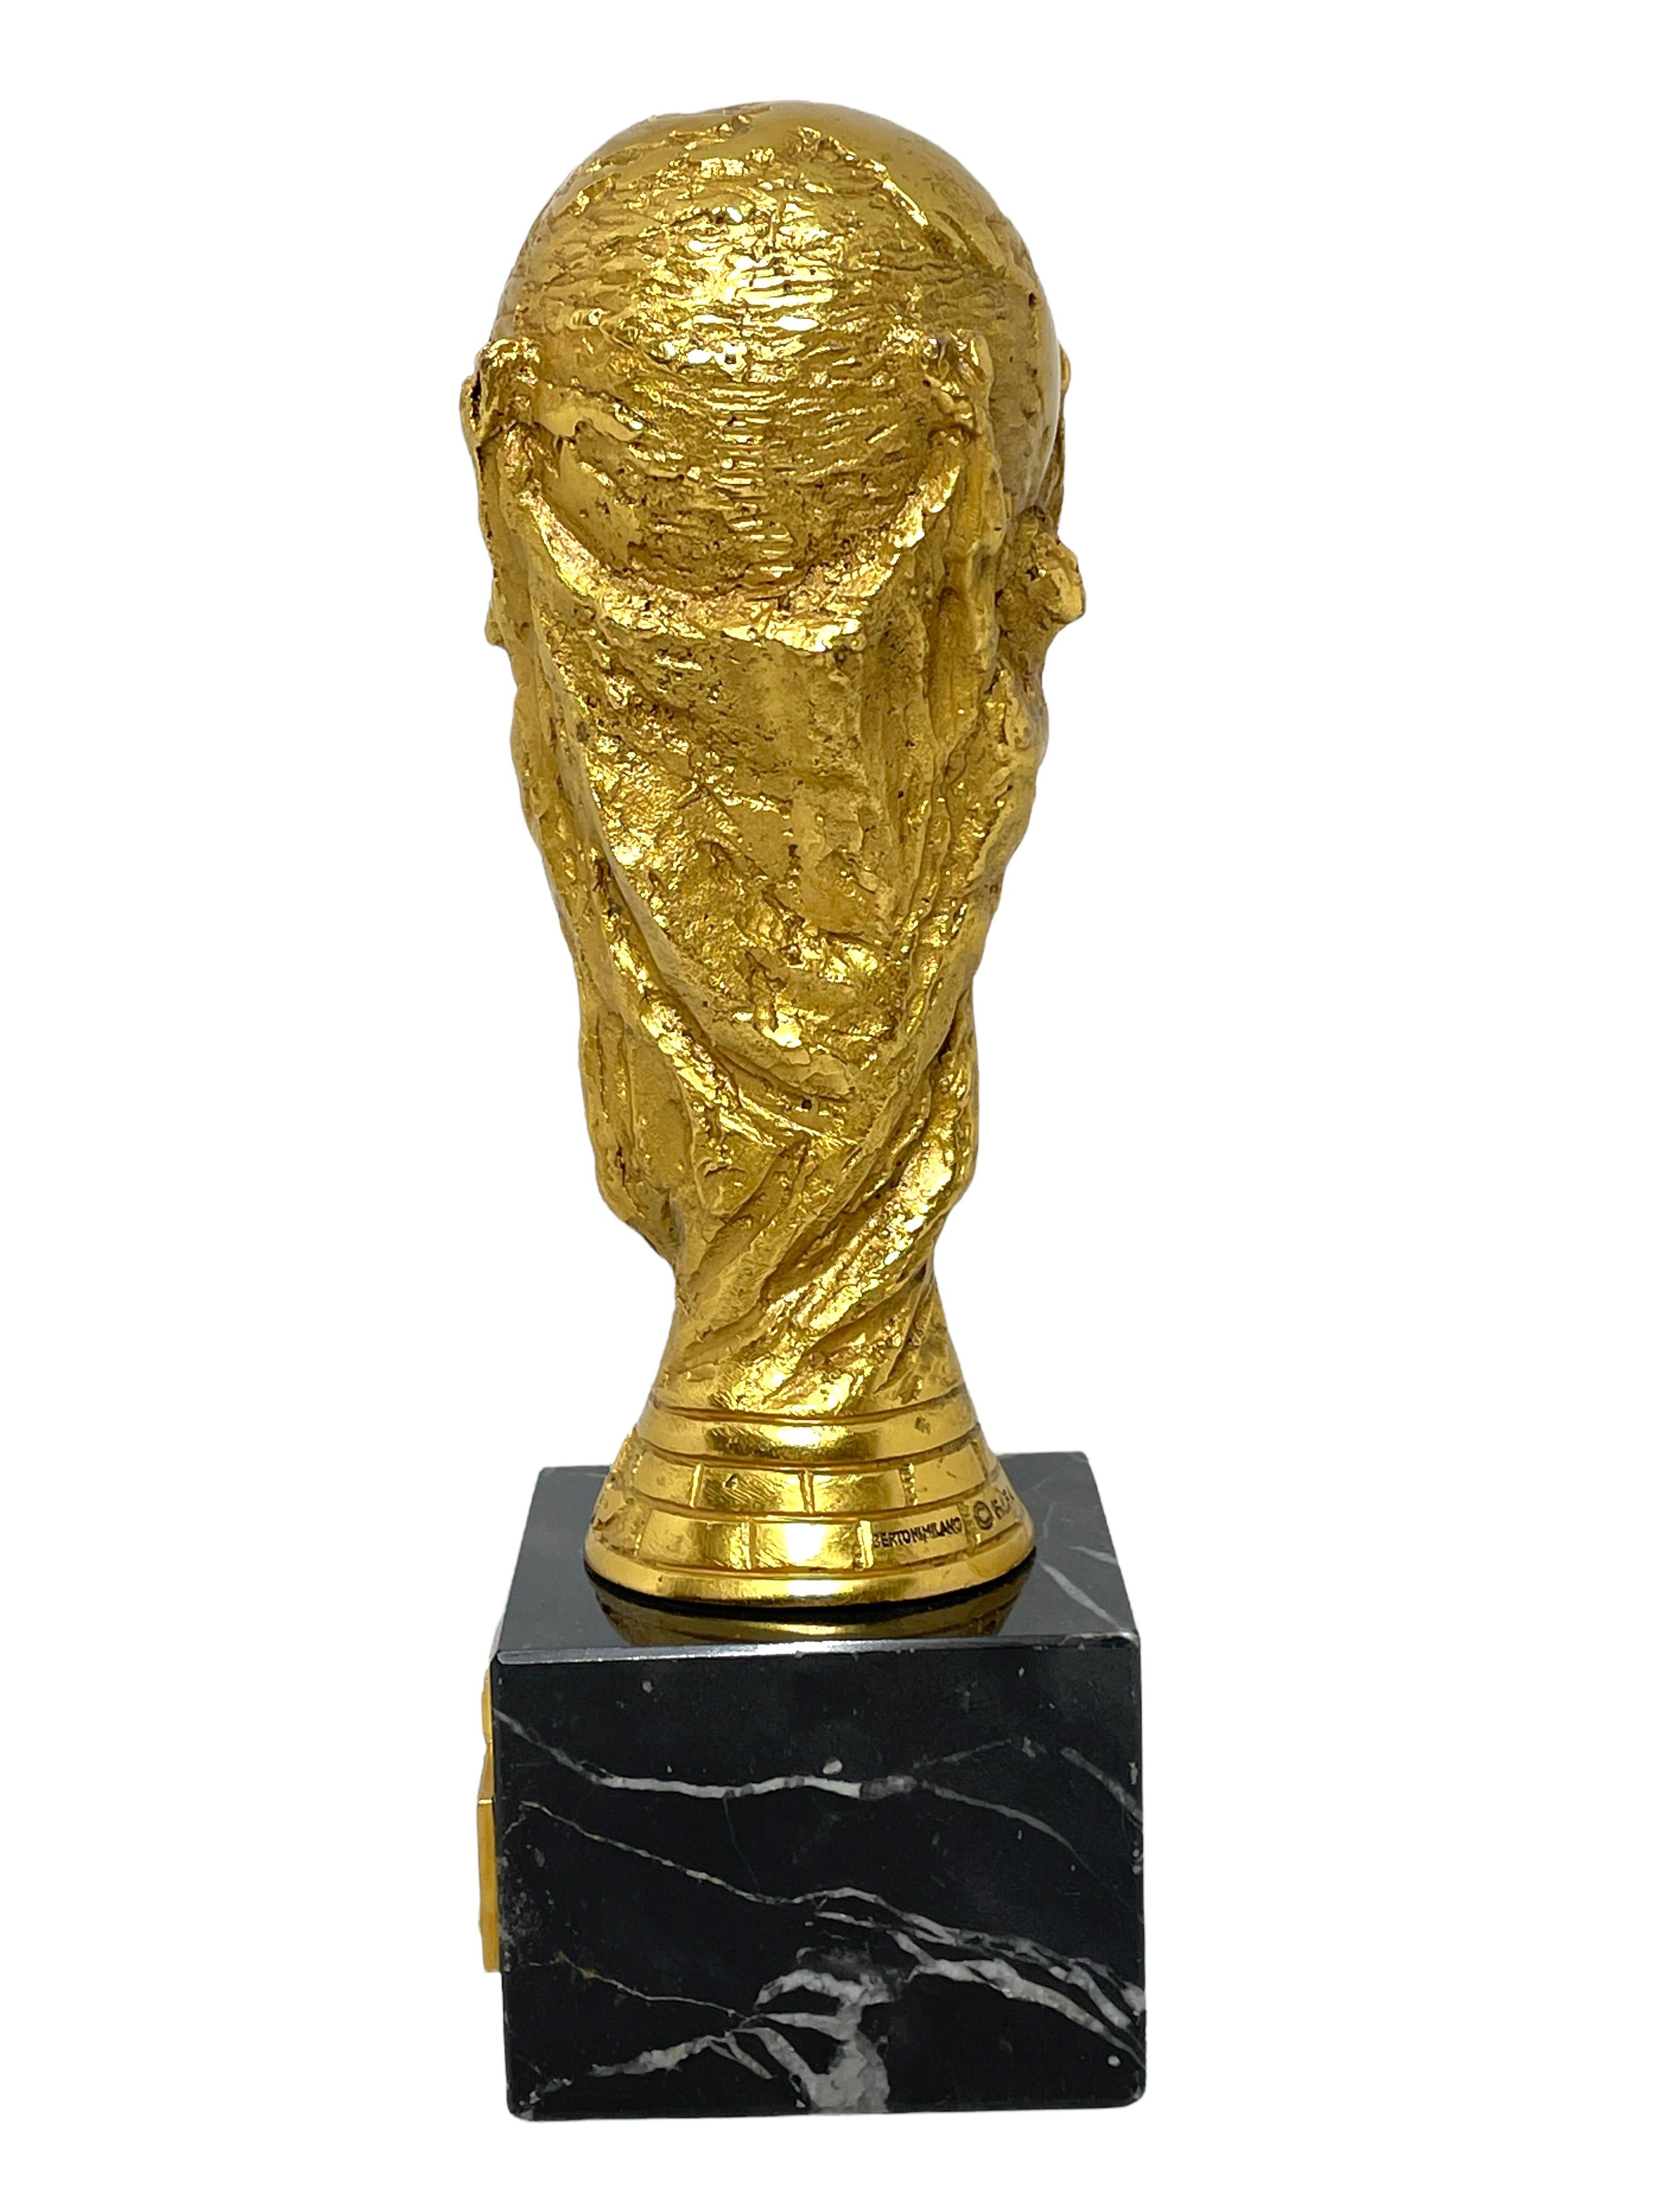 A beautiful substantial and stunning trophy made by Bertoni Milan Italy. This trophy was a give away, awarded to players, staff, coaches and federation members. It is a miniature, heavily build out of Bronze with a black marble base and is signed.